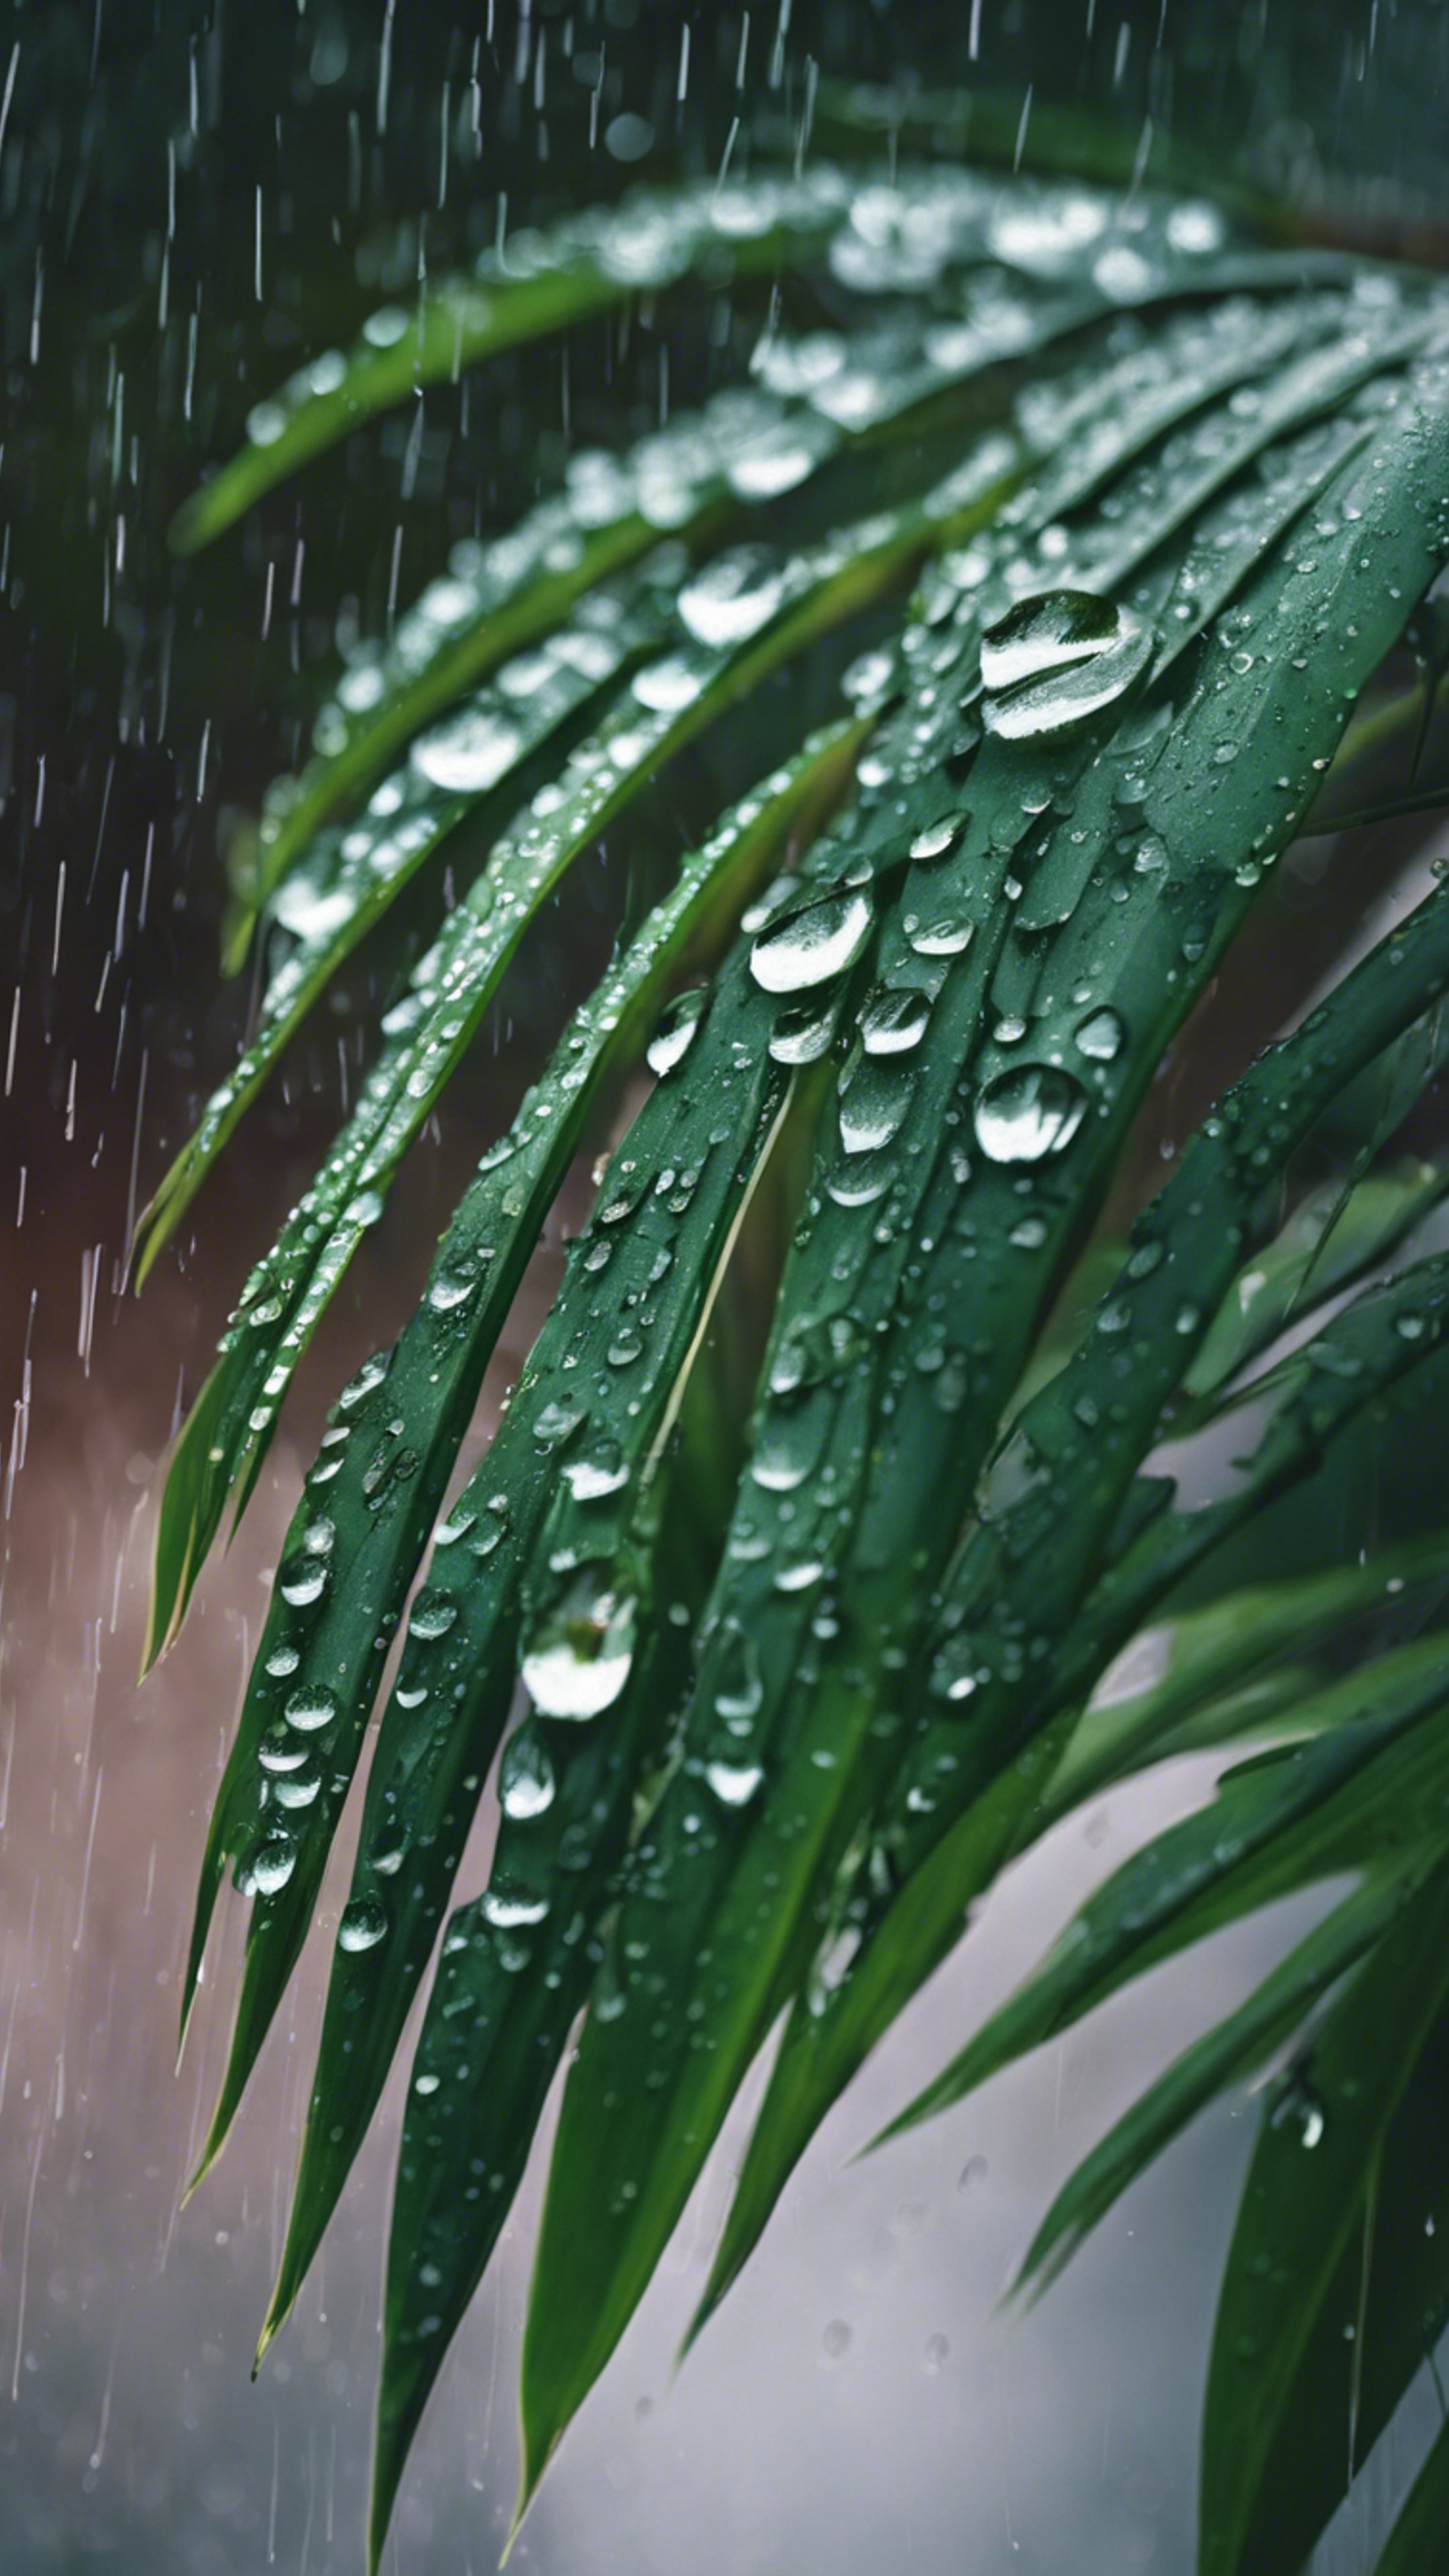 A beautifully presented palm leaf in the rain, droplets falling off its tips. Wallpaper[ec3663aabee2420b9456]